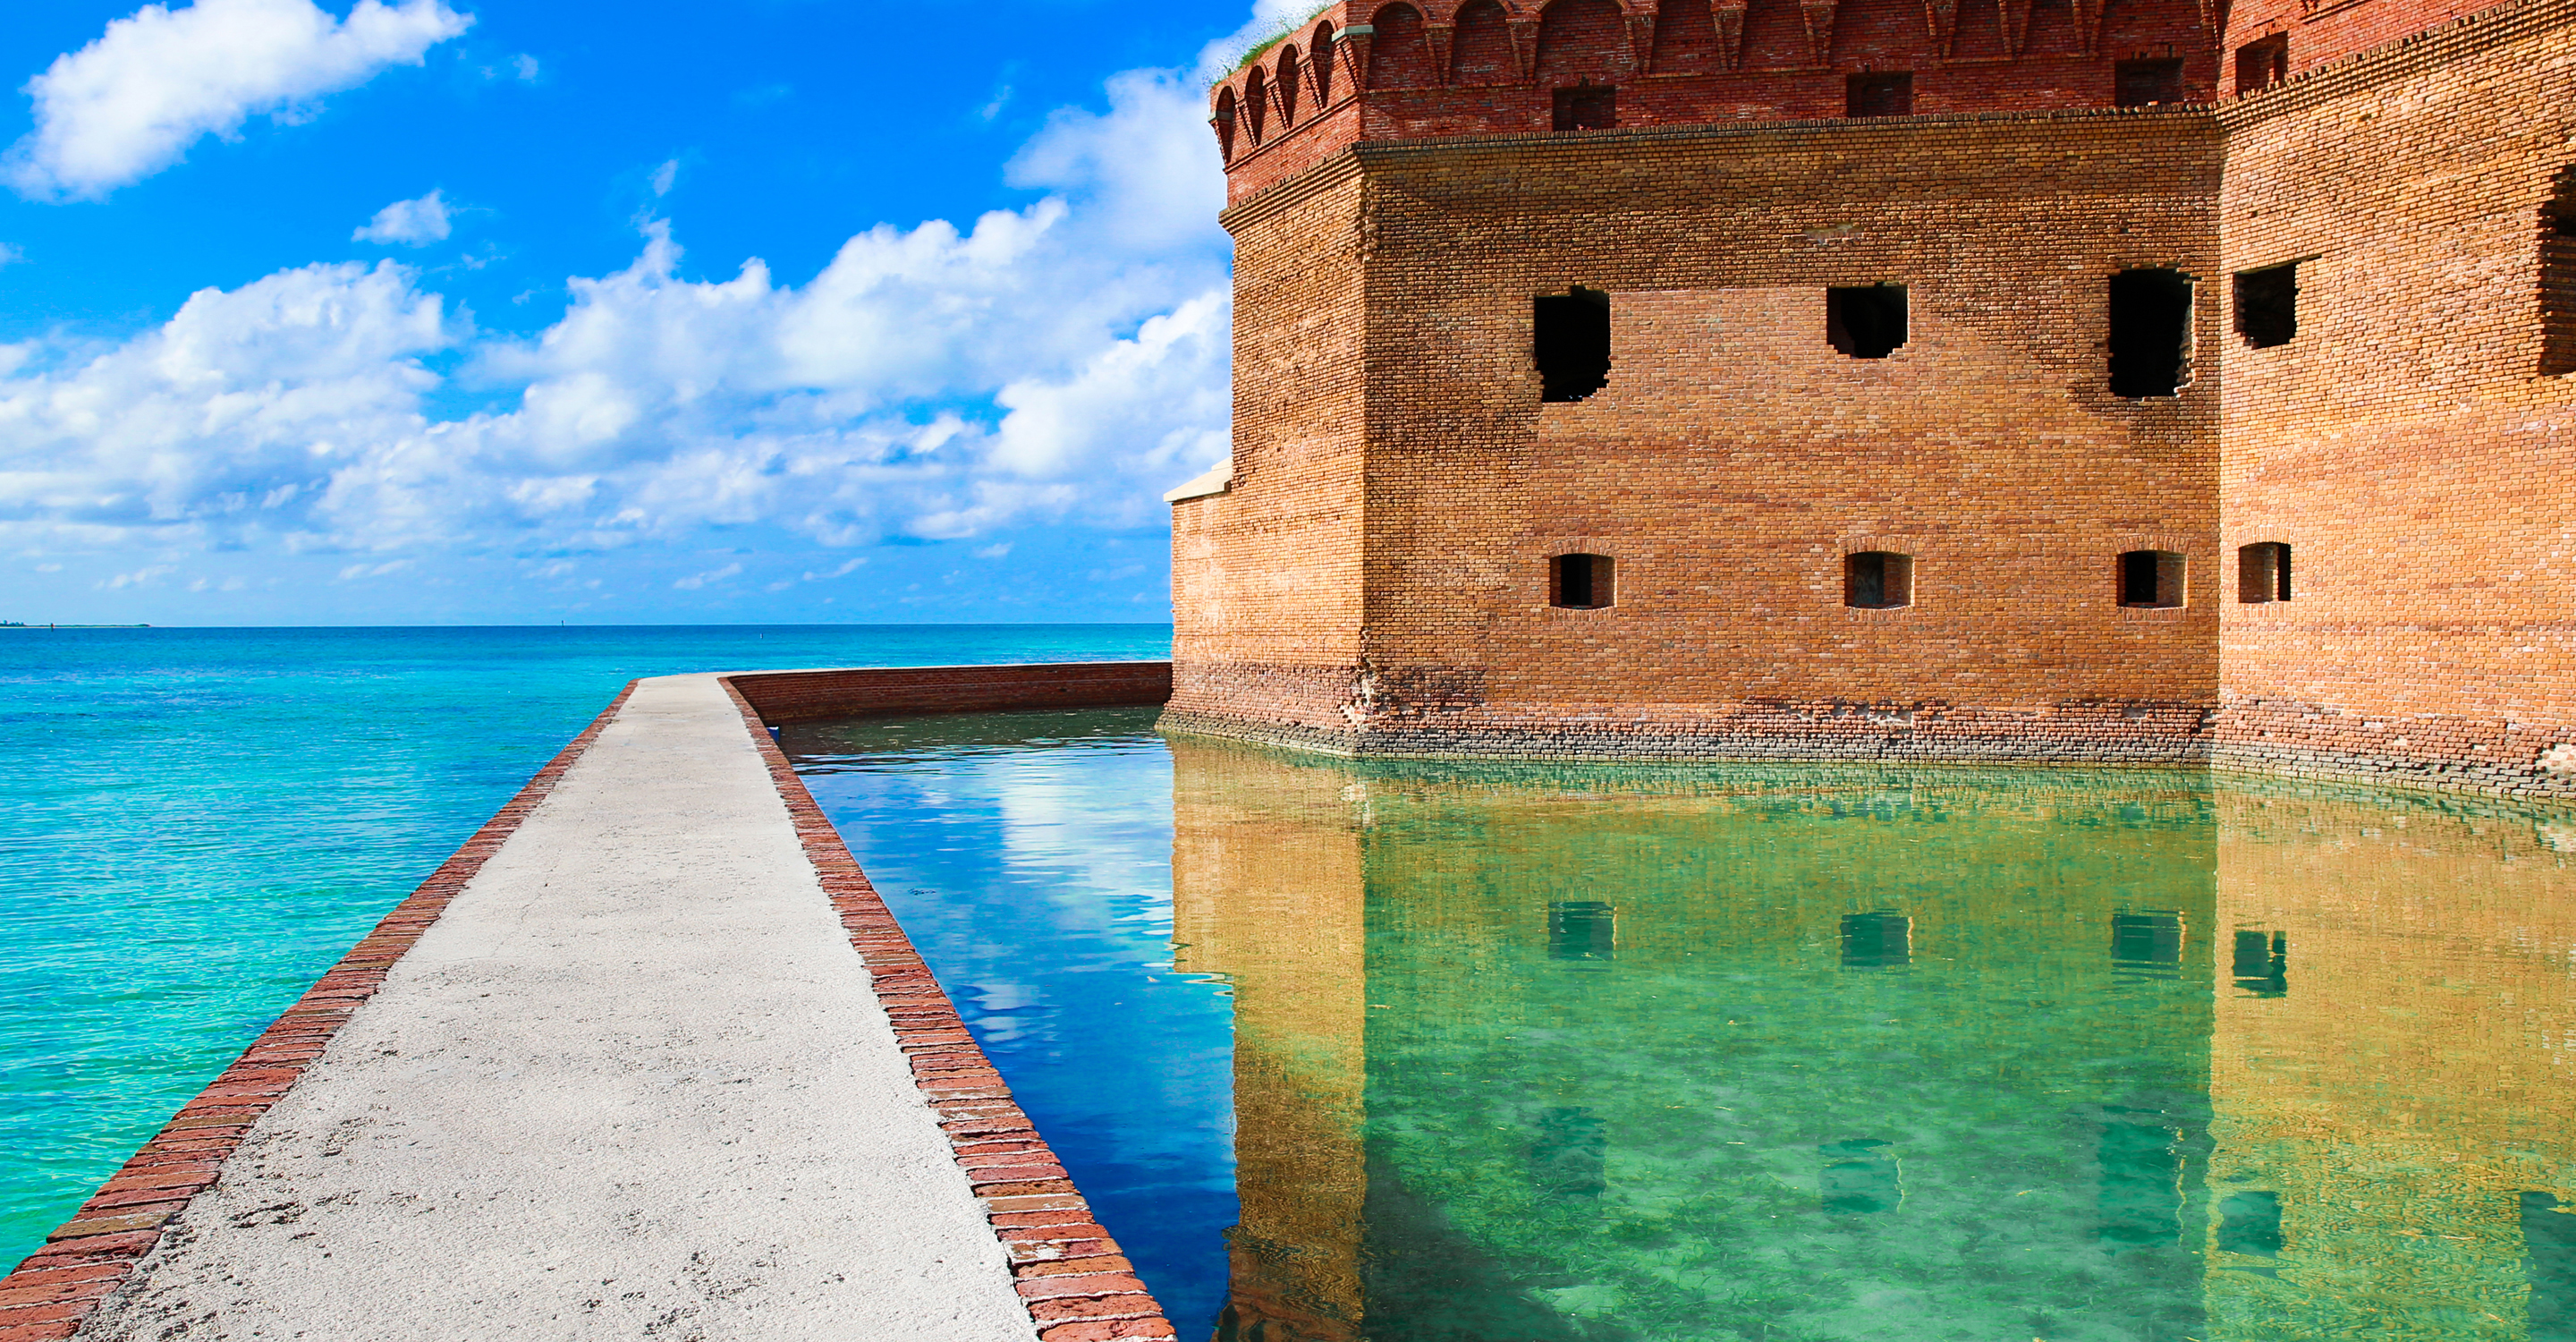 Wall of Fort Jefferson in Dry Tortugas National Park, Florida, United States